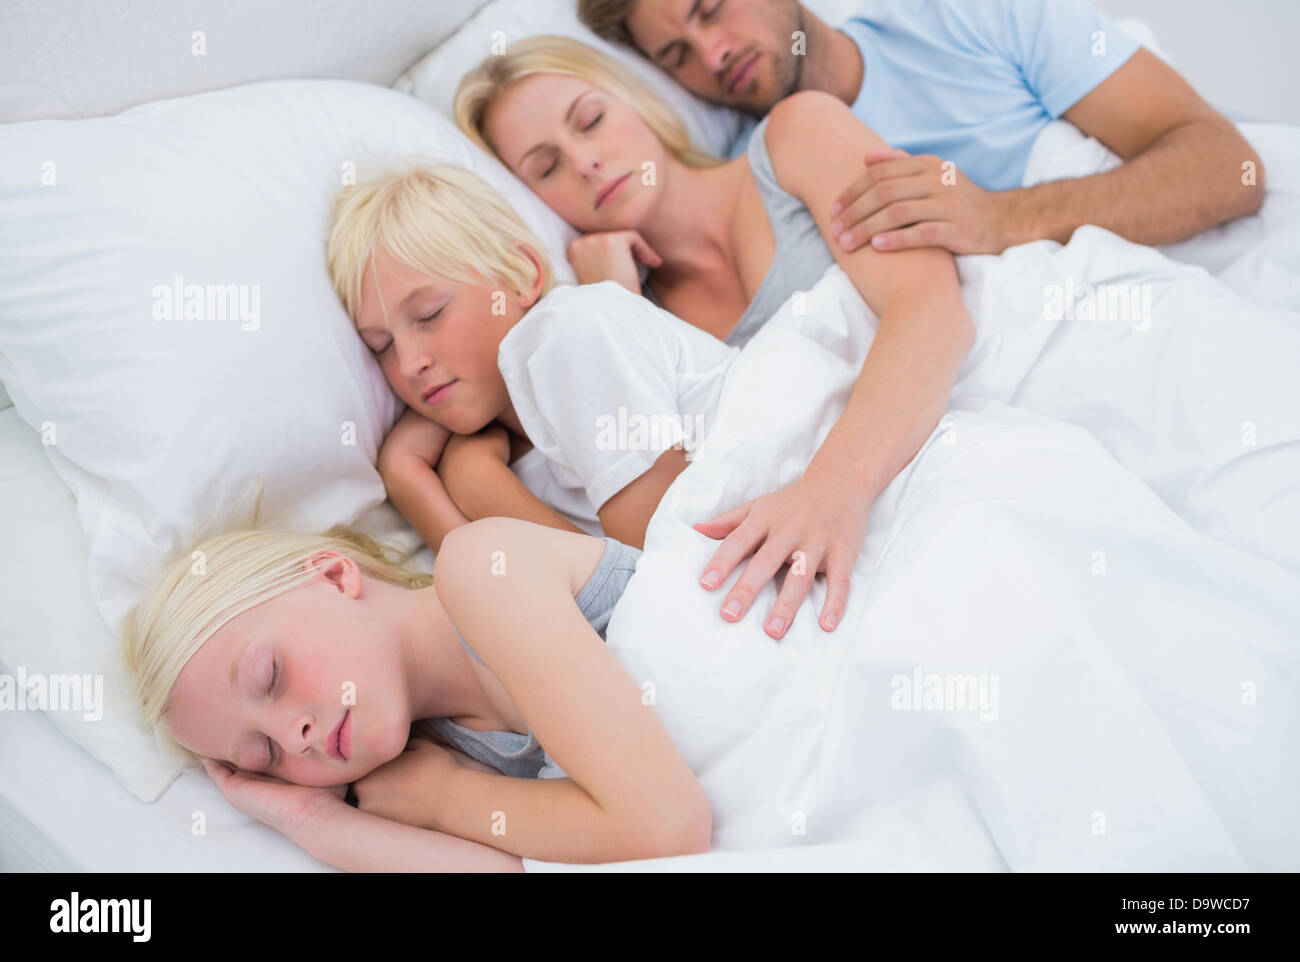 Cute Loving Couple Is Sleeping In Bed And Embracing With Gentleness Stock  Photo, Picture and Royalty Free Image. Image 65388456.